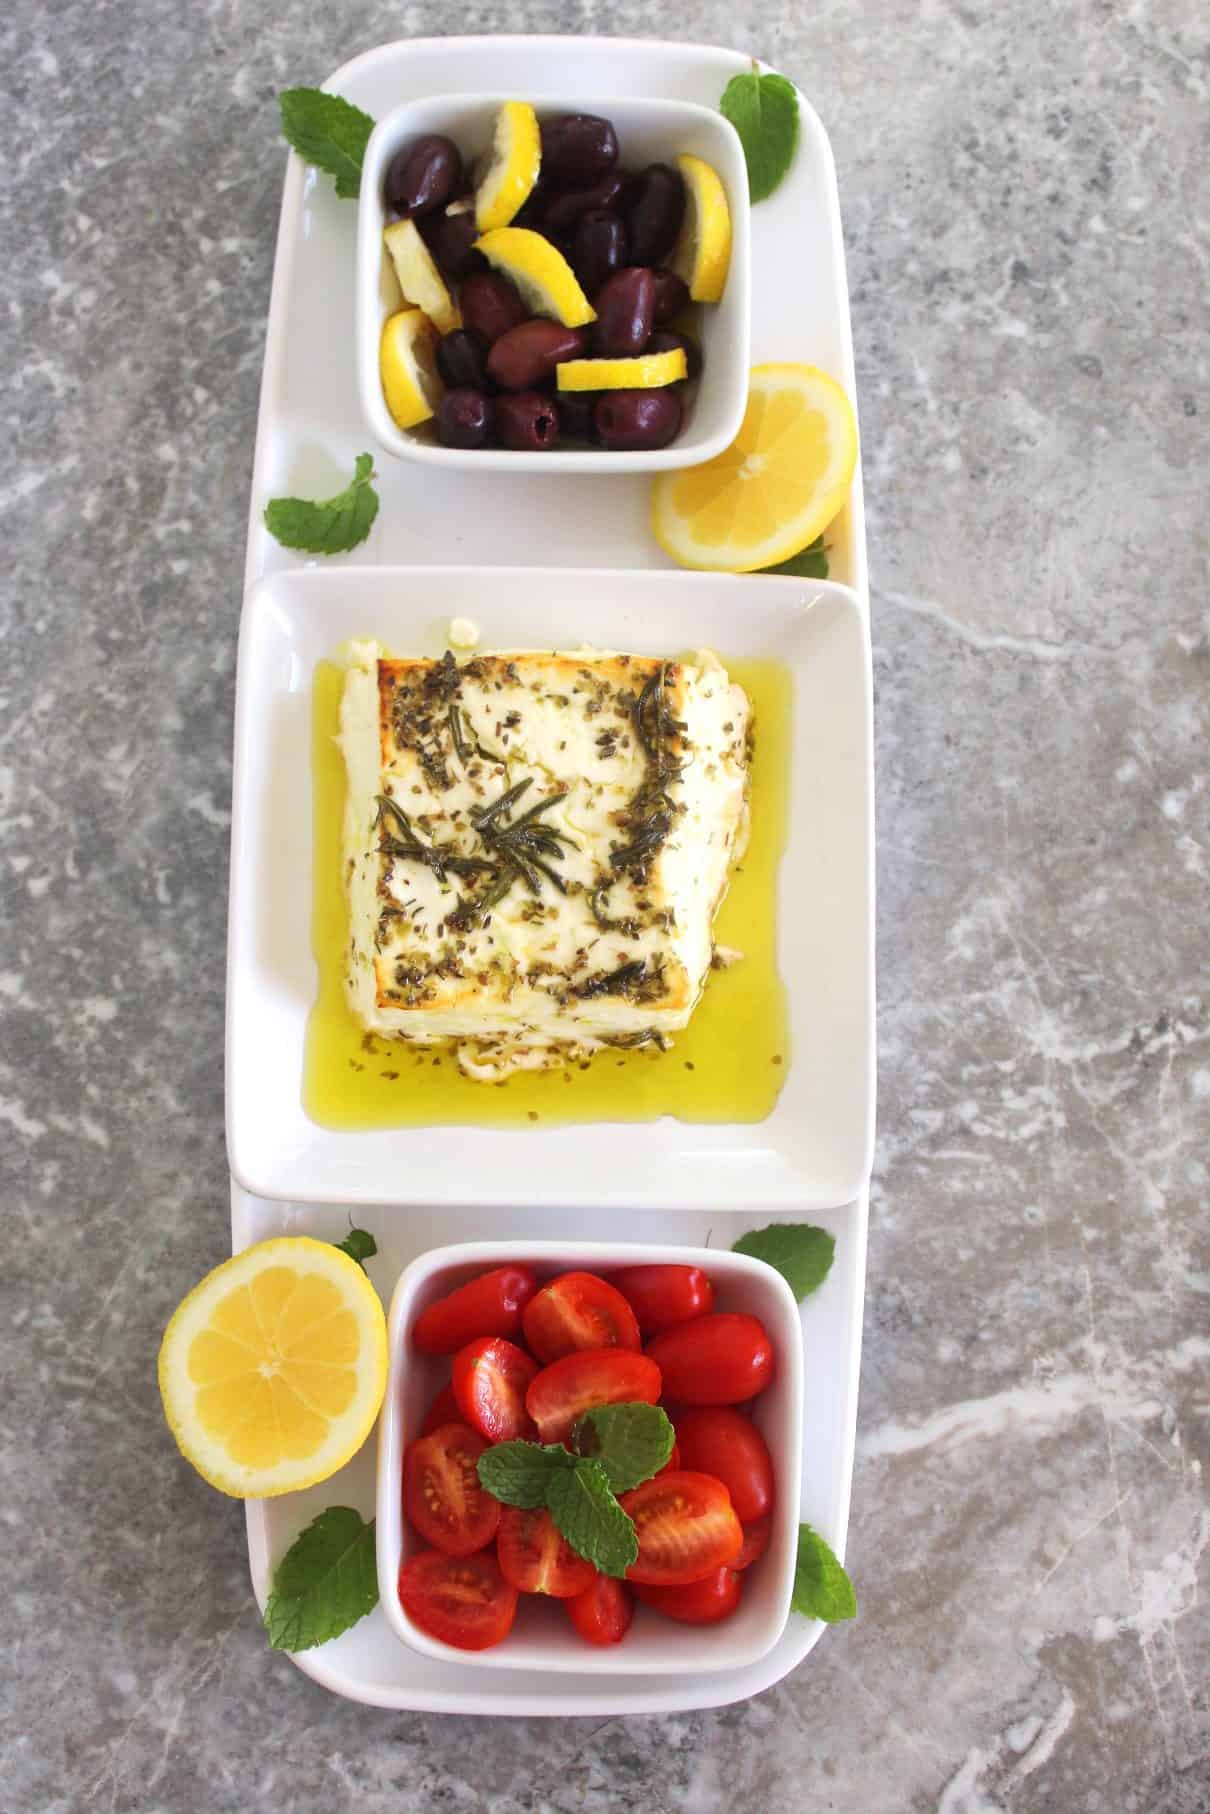 Appetizer tray with 3 separate side dishes: from top to bottom, olives with lemon, baked feta cheese, herbed in olive oil and lastly grape tomatoes with mint.